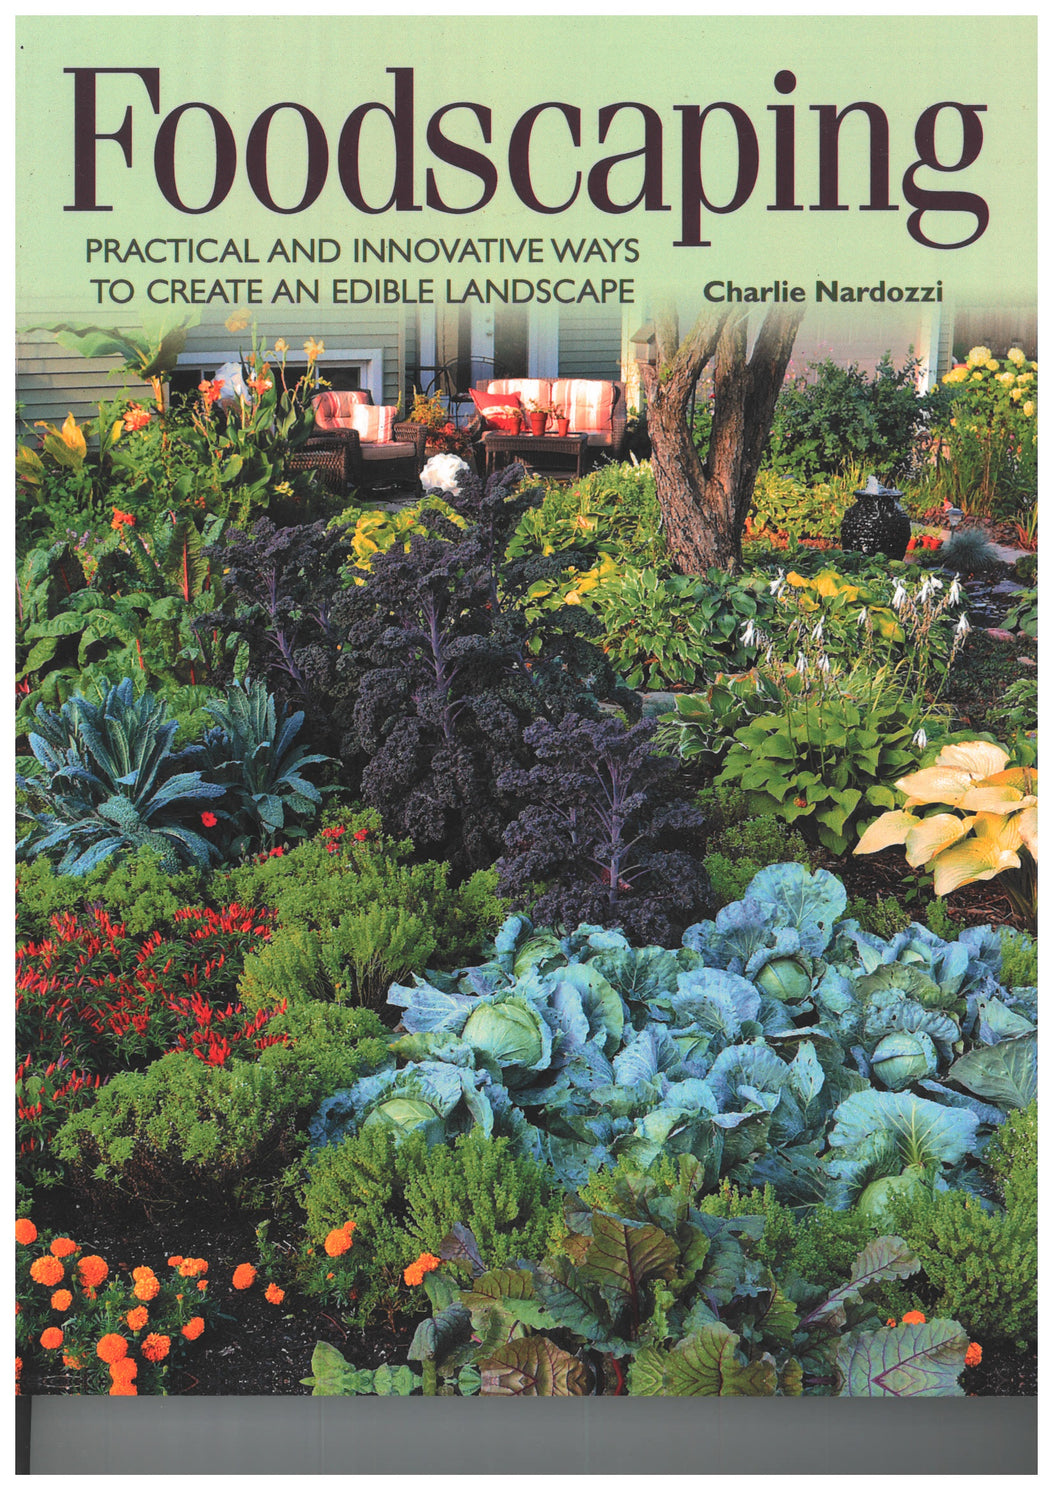 Foodscaping: Practical and Innovative Ways to Create an Edible Landscape by Charlie Nardozzi